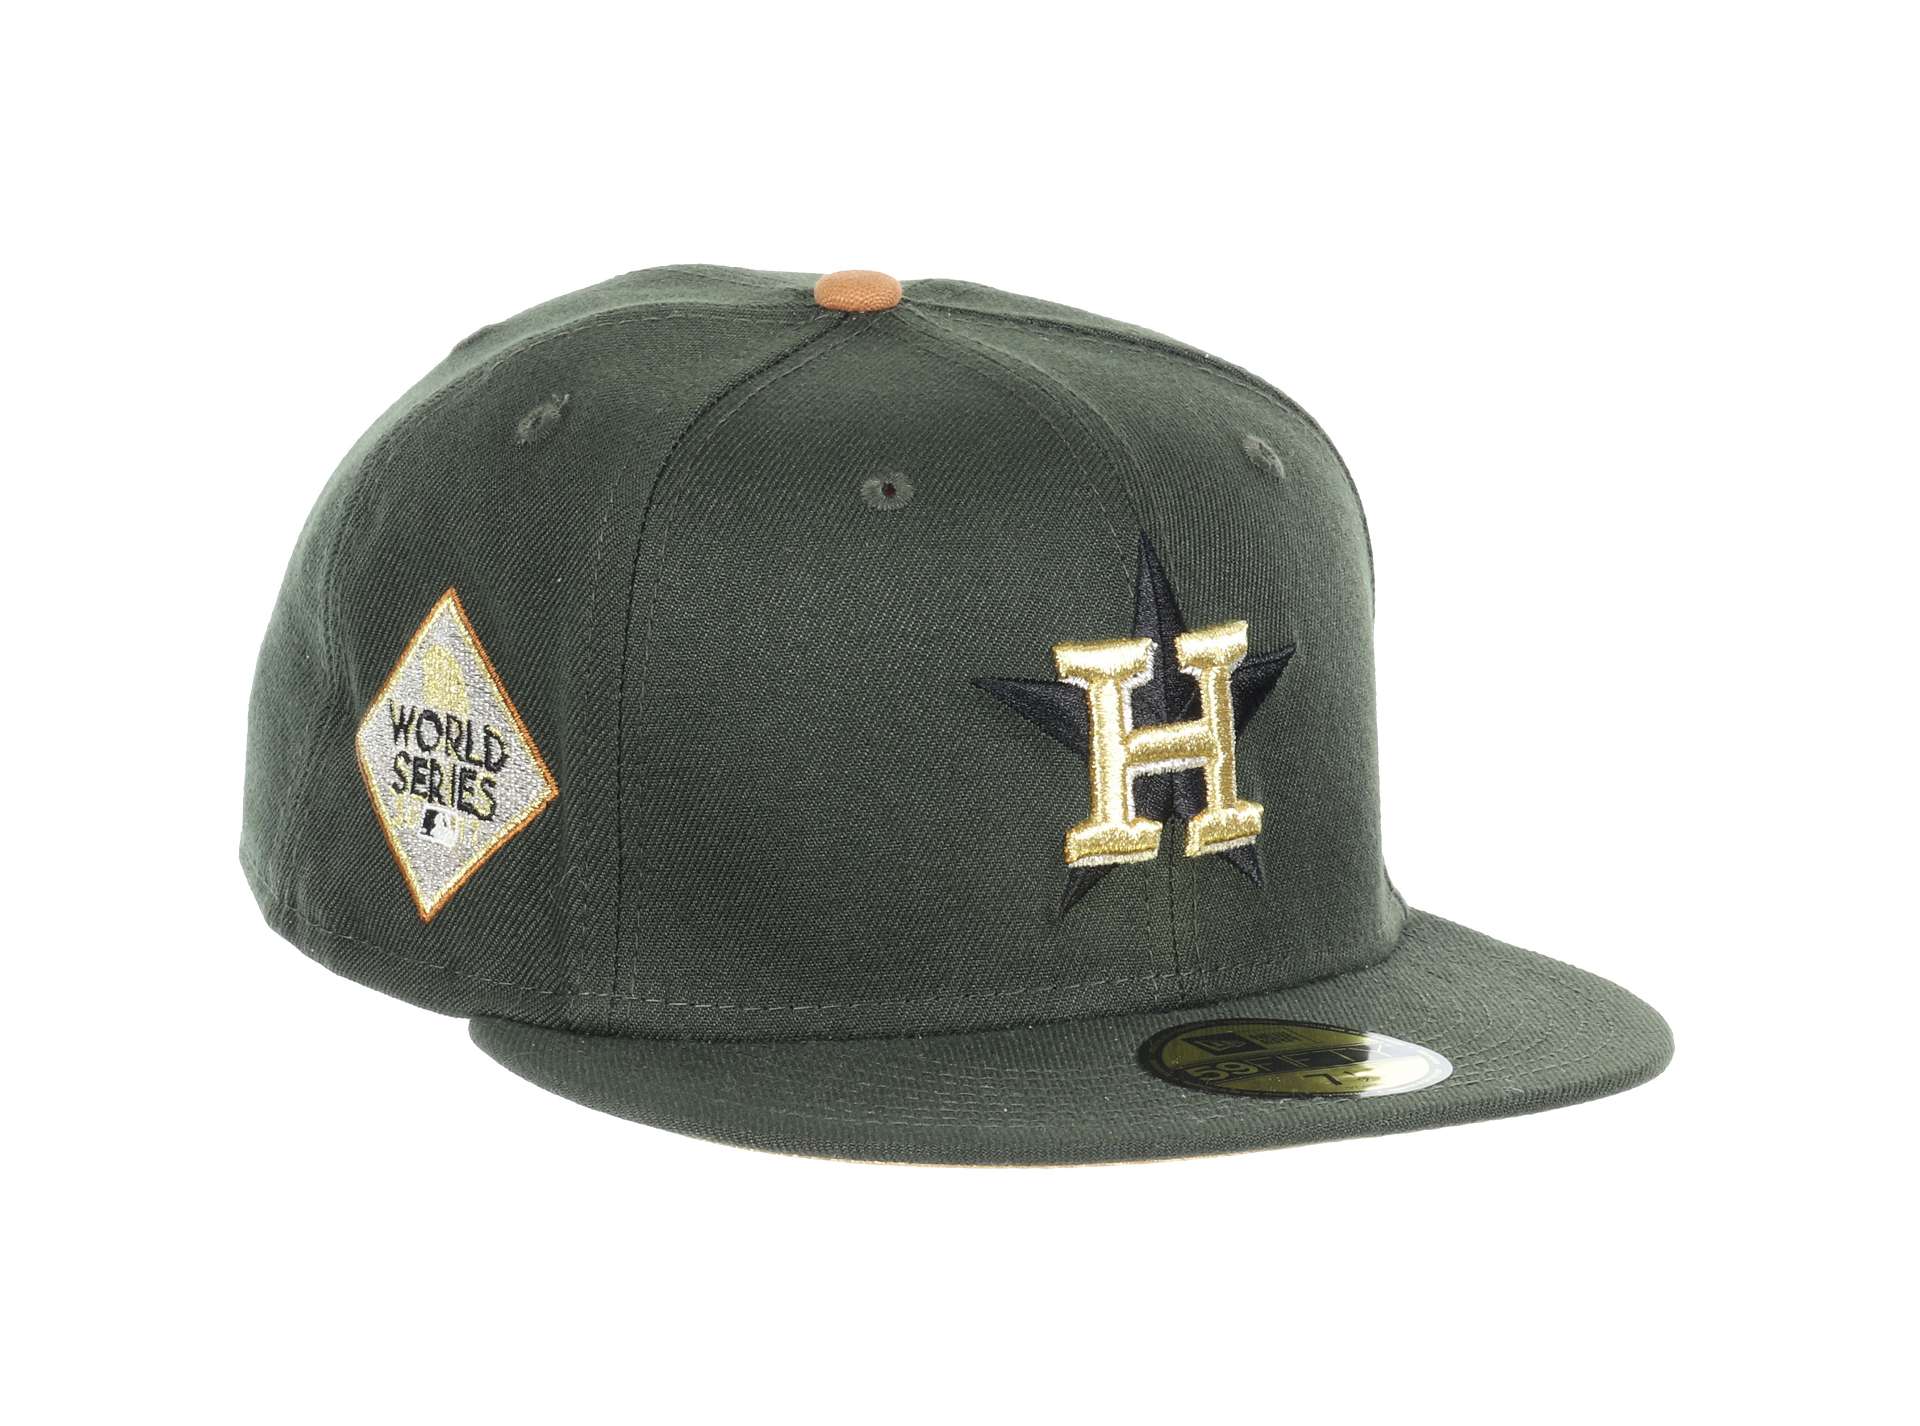 Houston Astros MLB Cooperstown World Series 2017 Sidepatch Green 59Fifty Basecap New Era